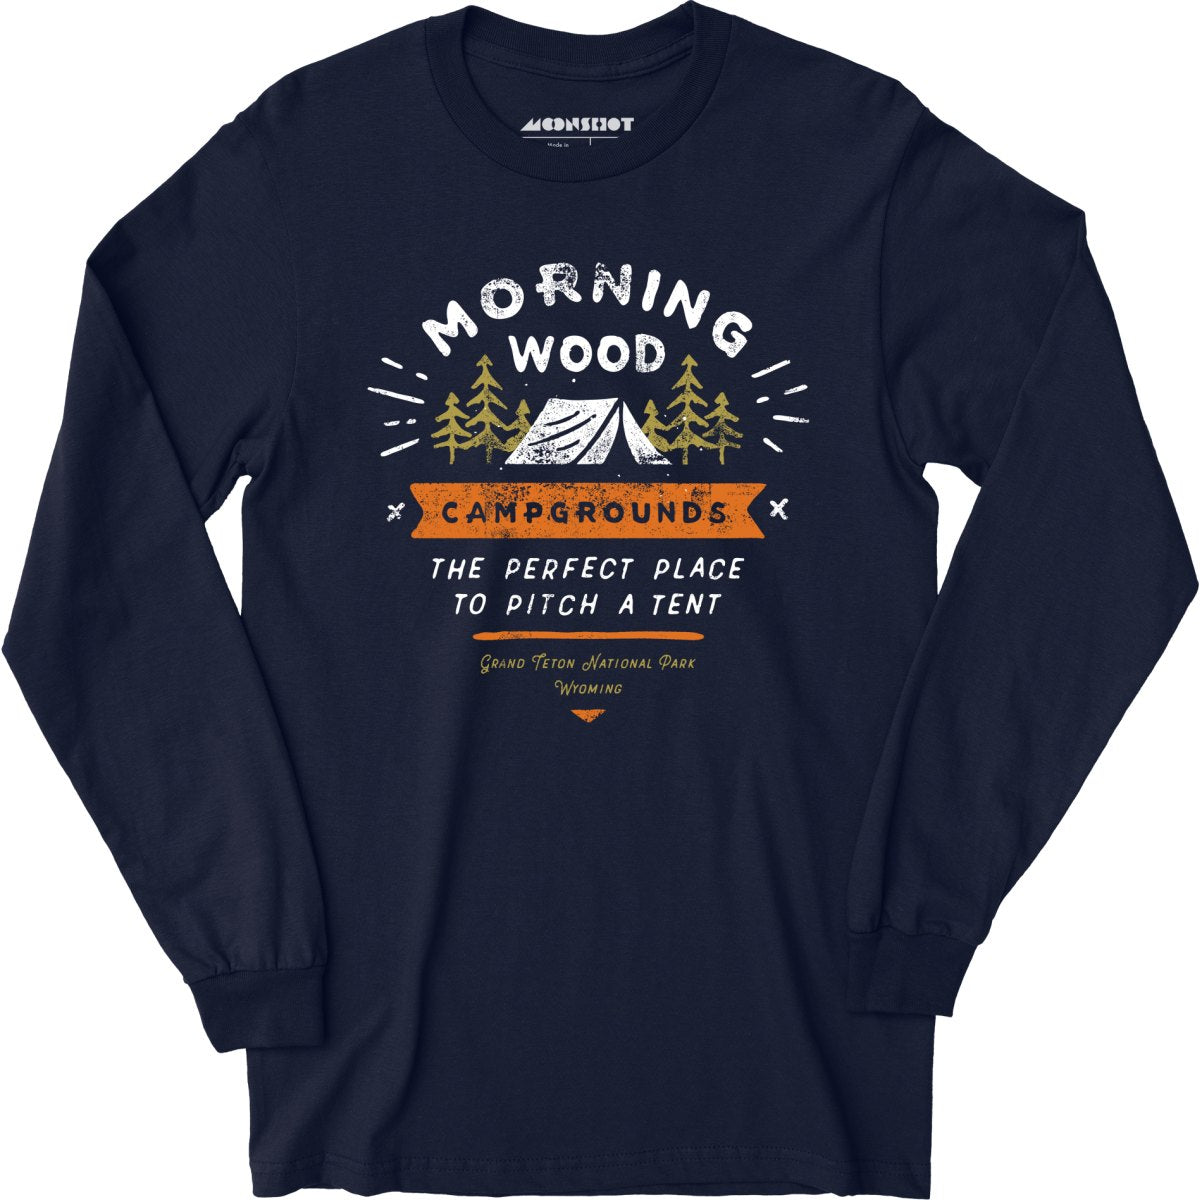 Morning Wood Campgrounds - Long Sleeve T-Shirt